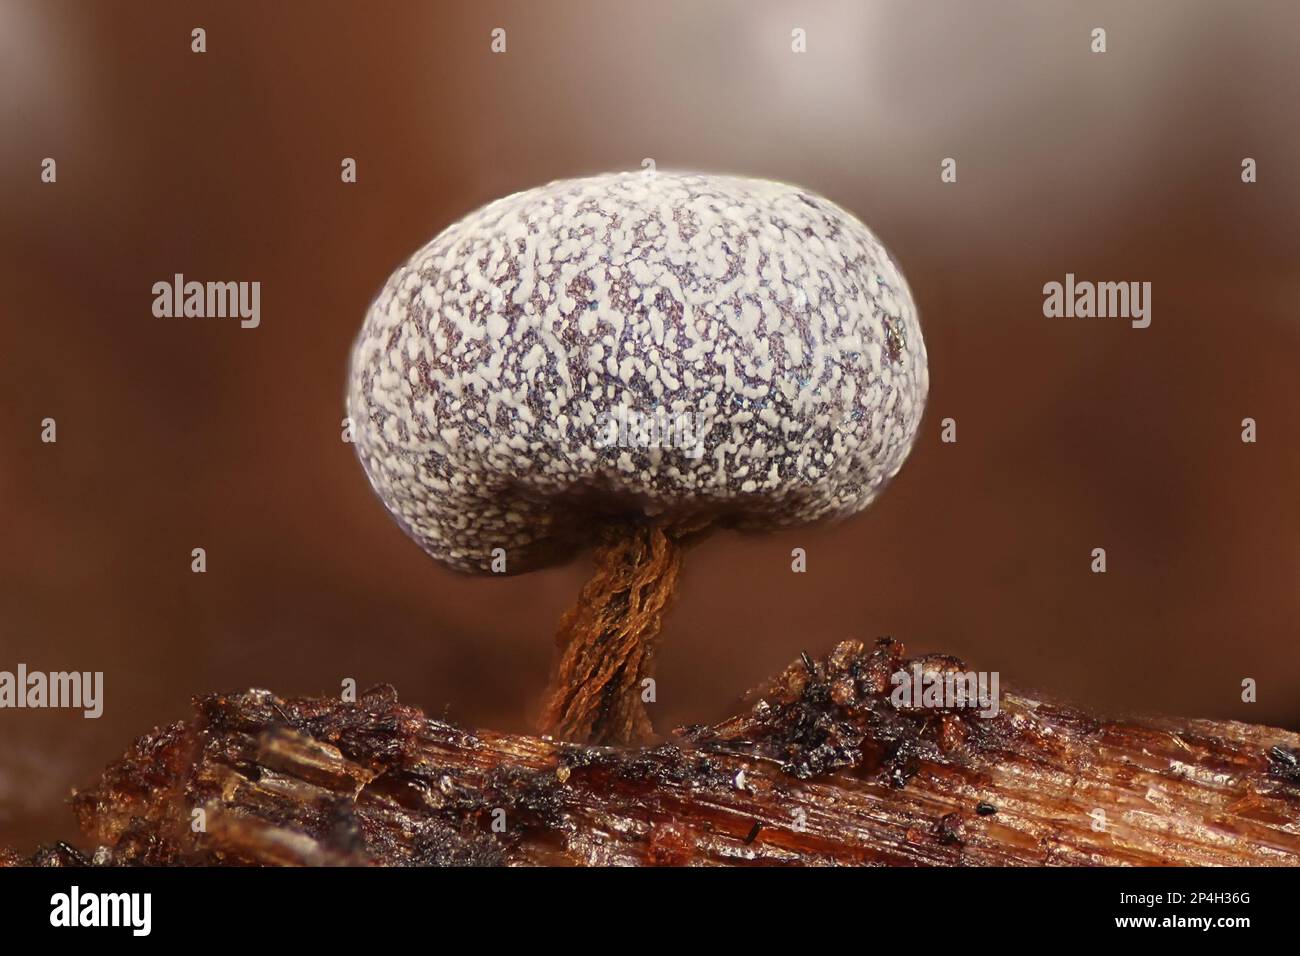 Physarum leucophaeum, slime mold from Finland, microscope image Stock Photo